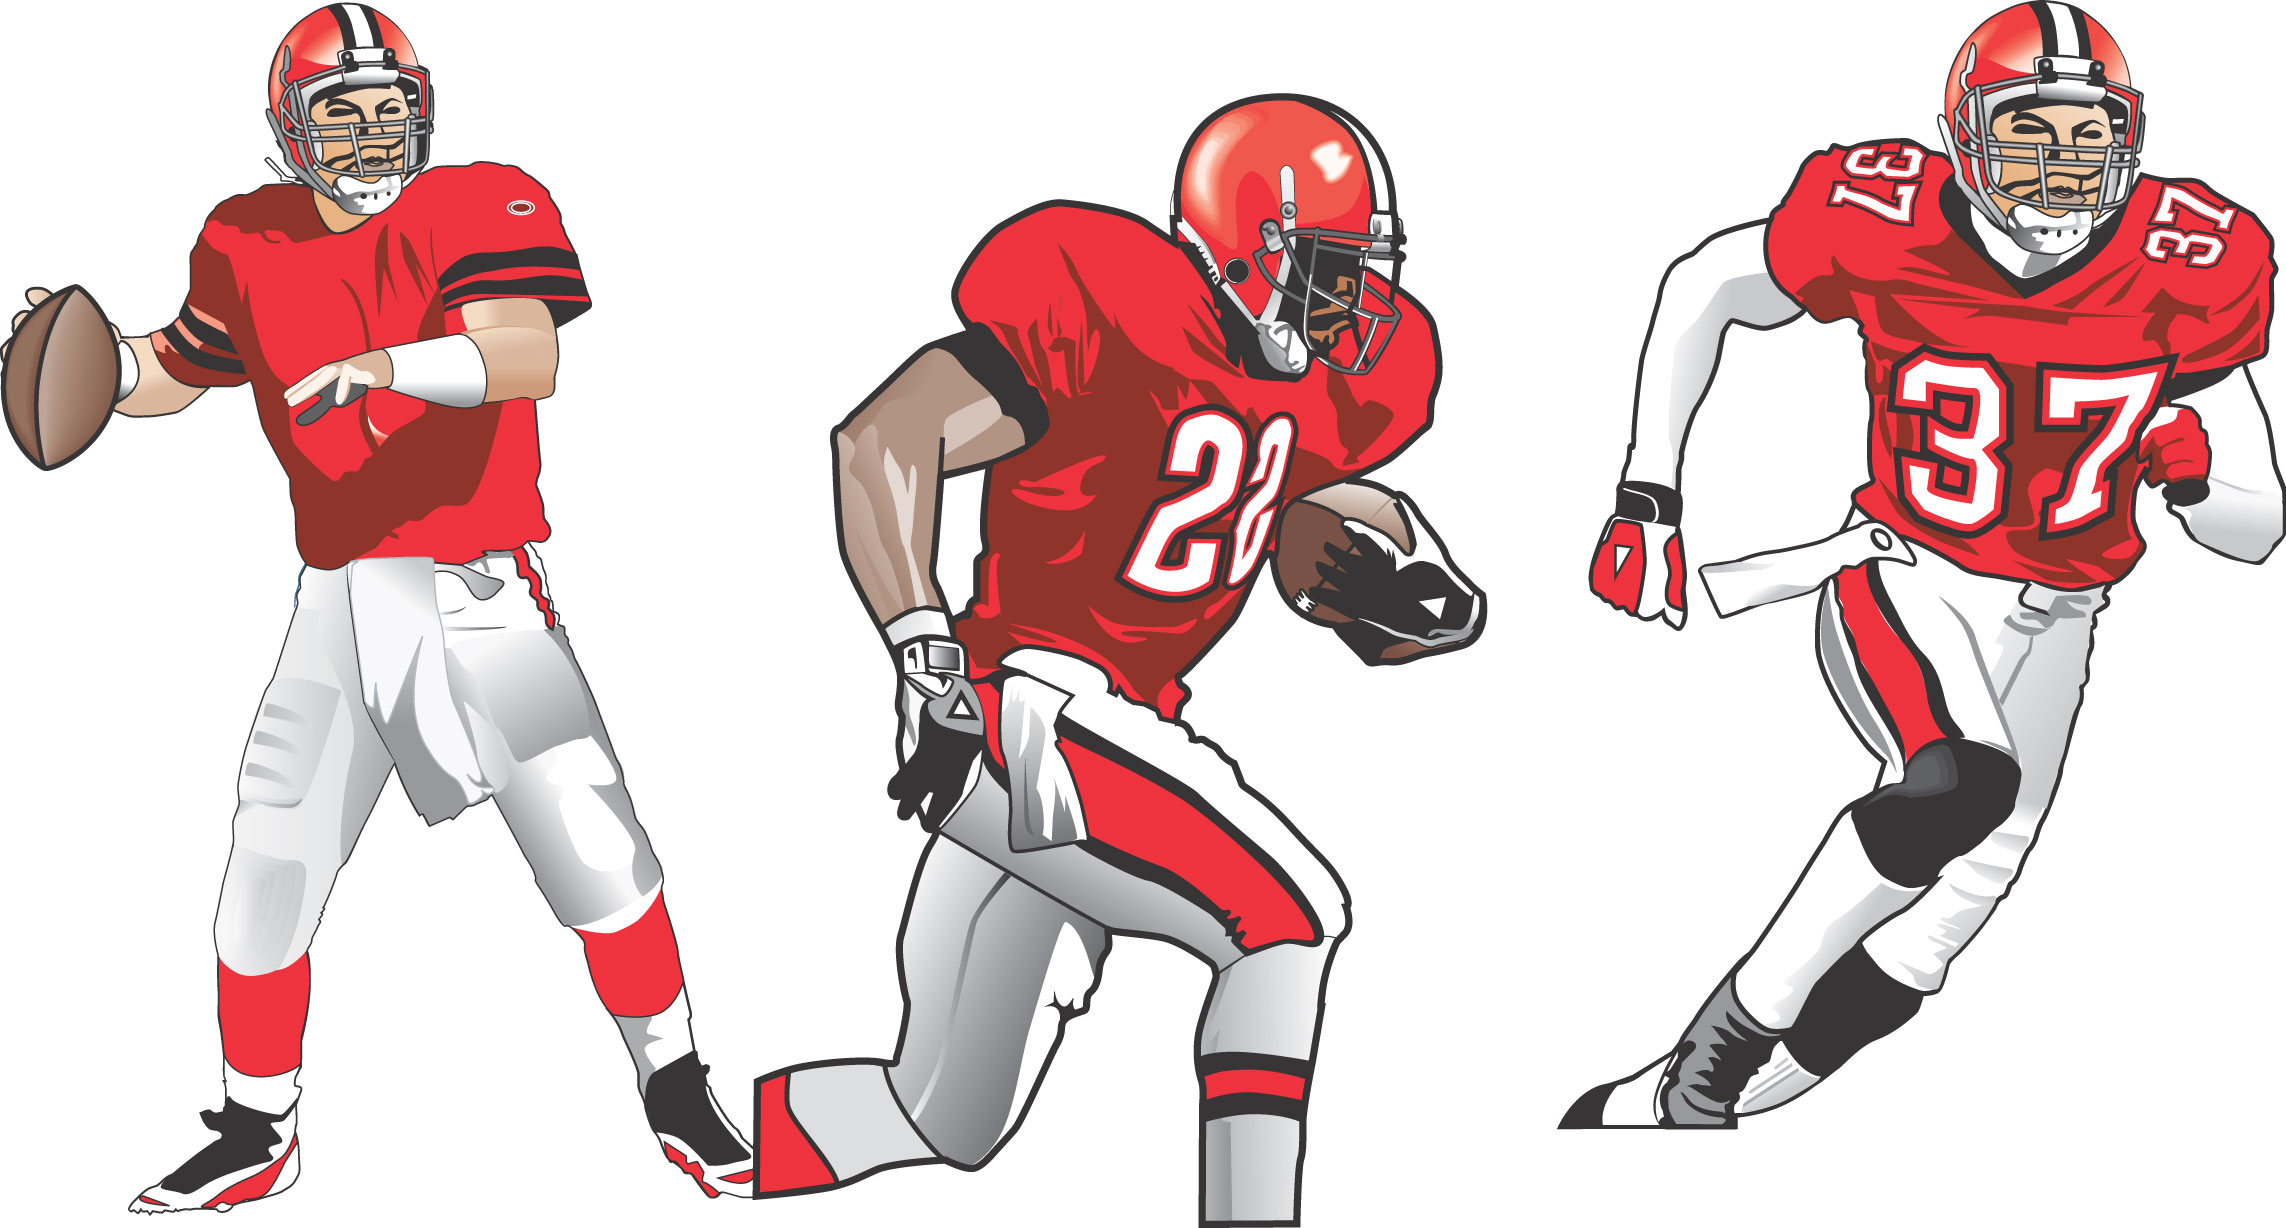 Search for Football drawing at GetDrawings.com